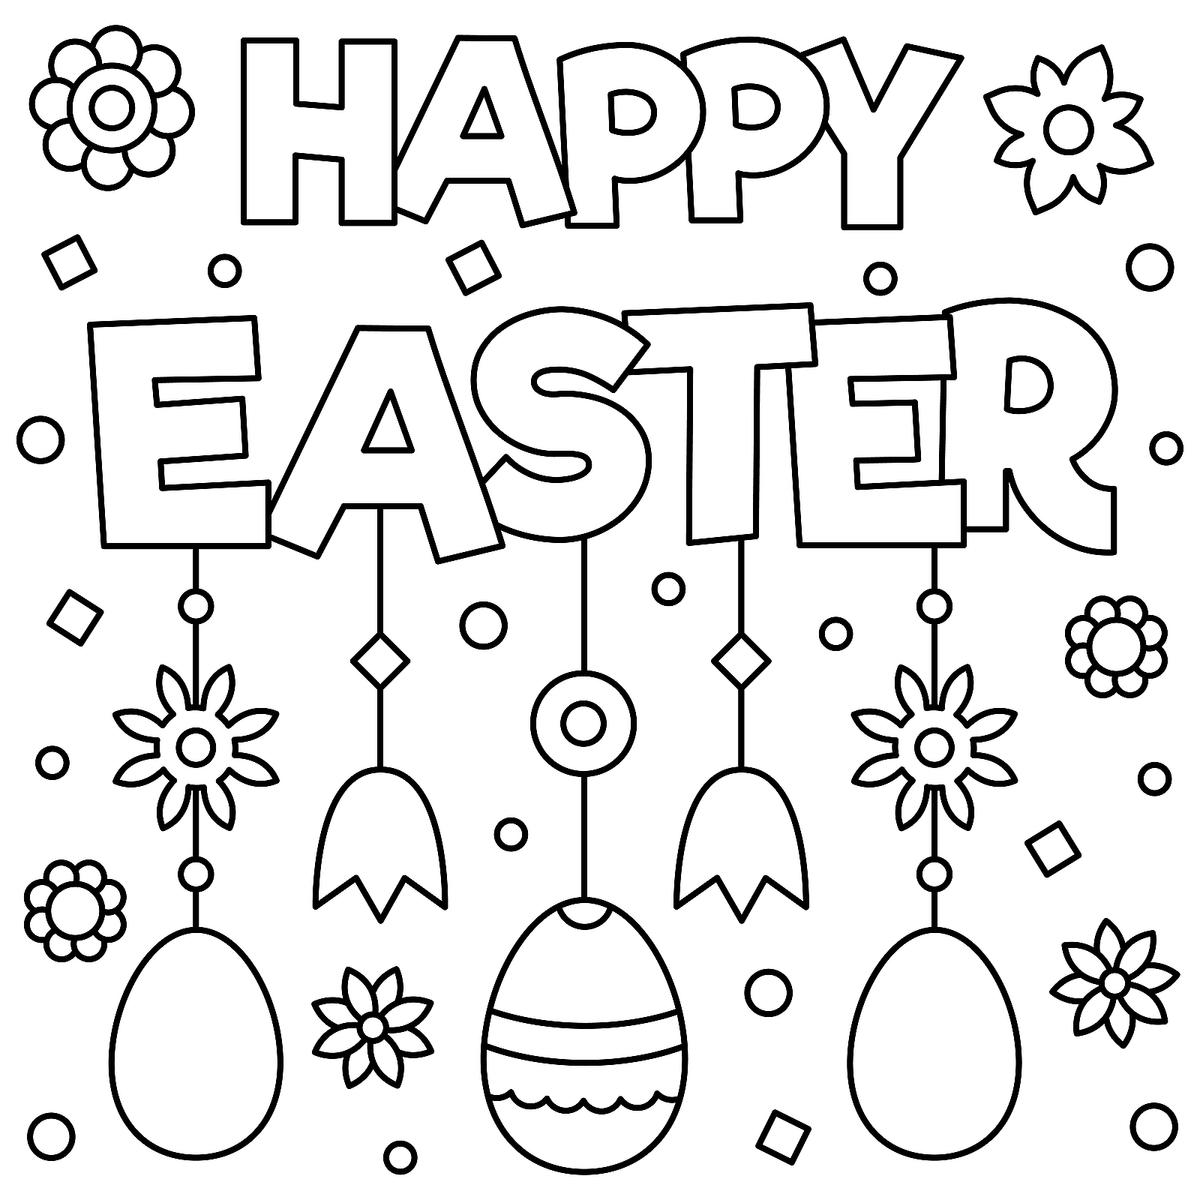 Free Printable Images For Easter